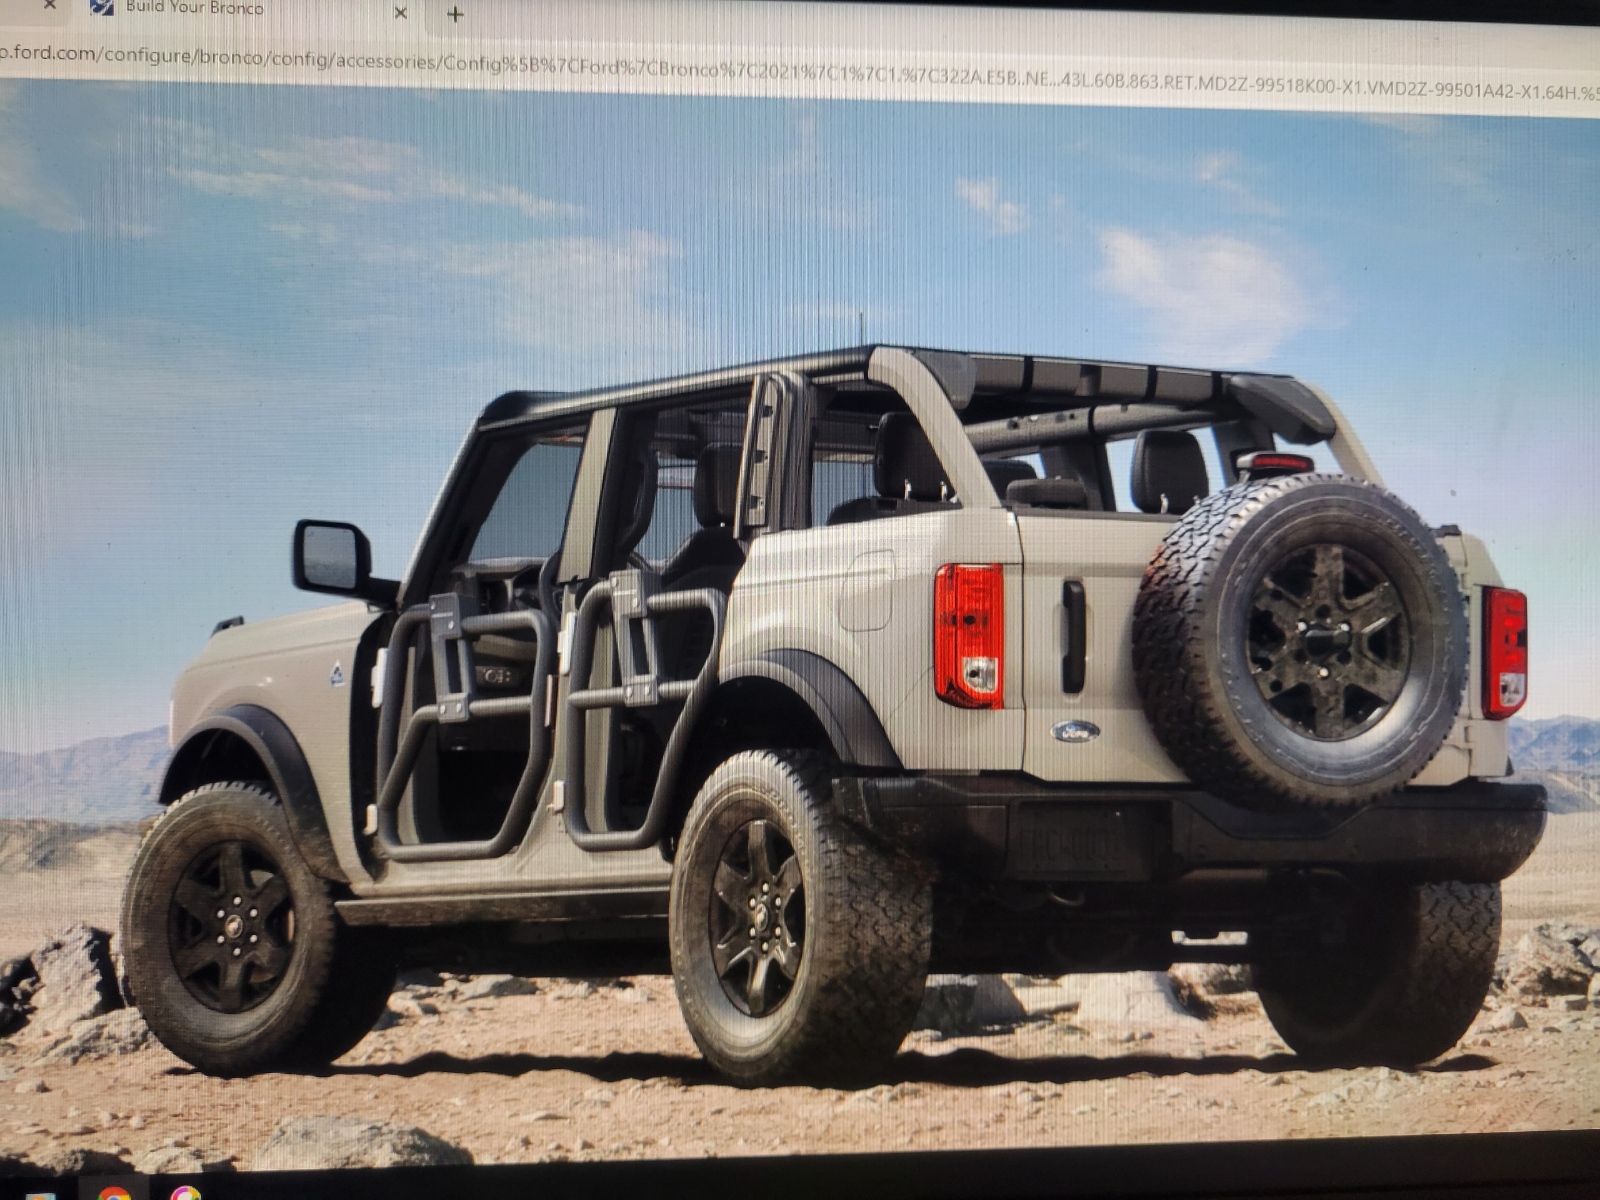 Ford Bronco What is your final build? bronco pic